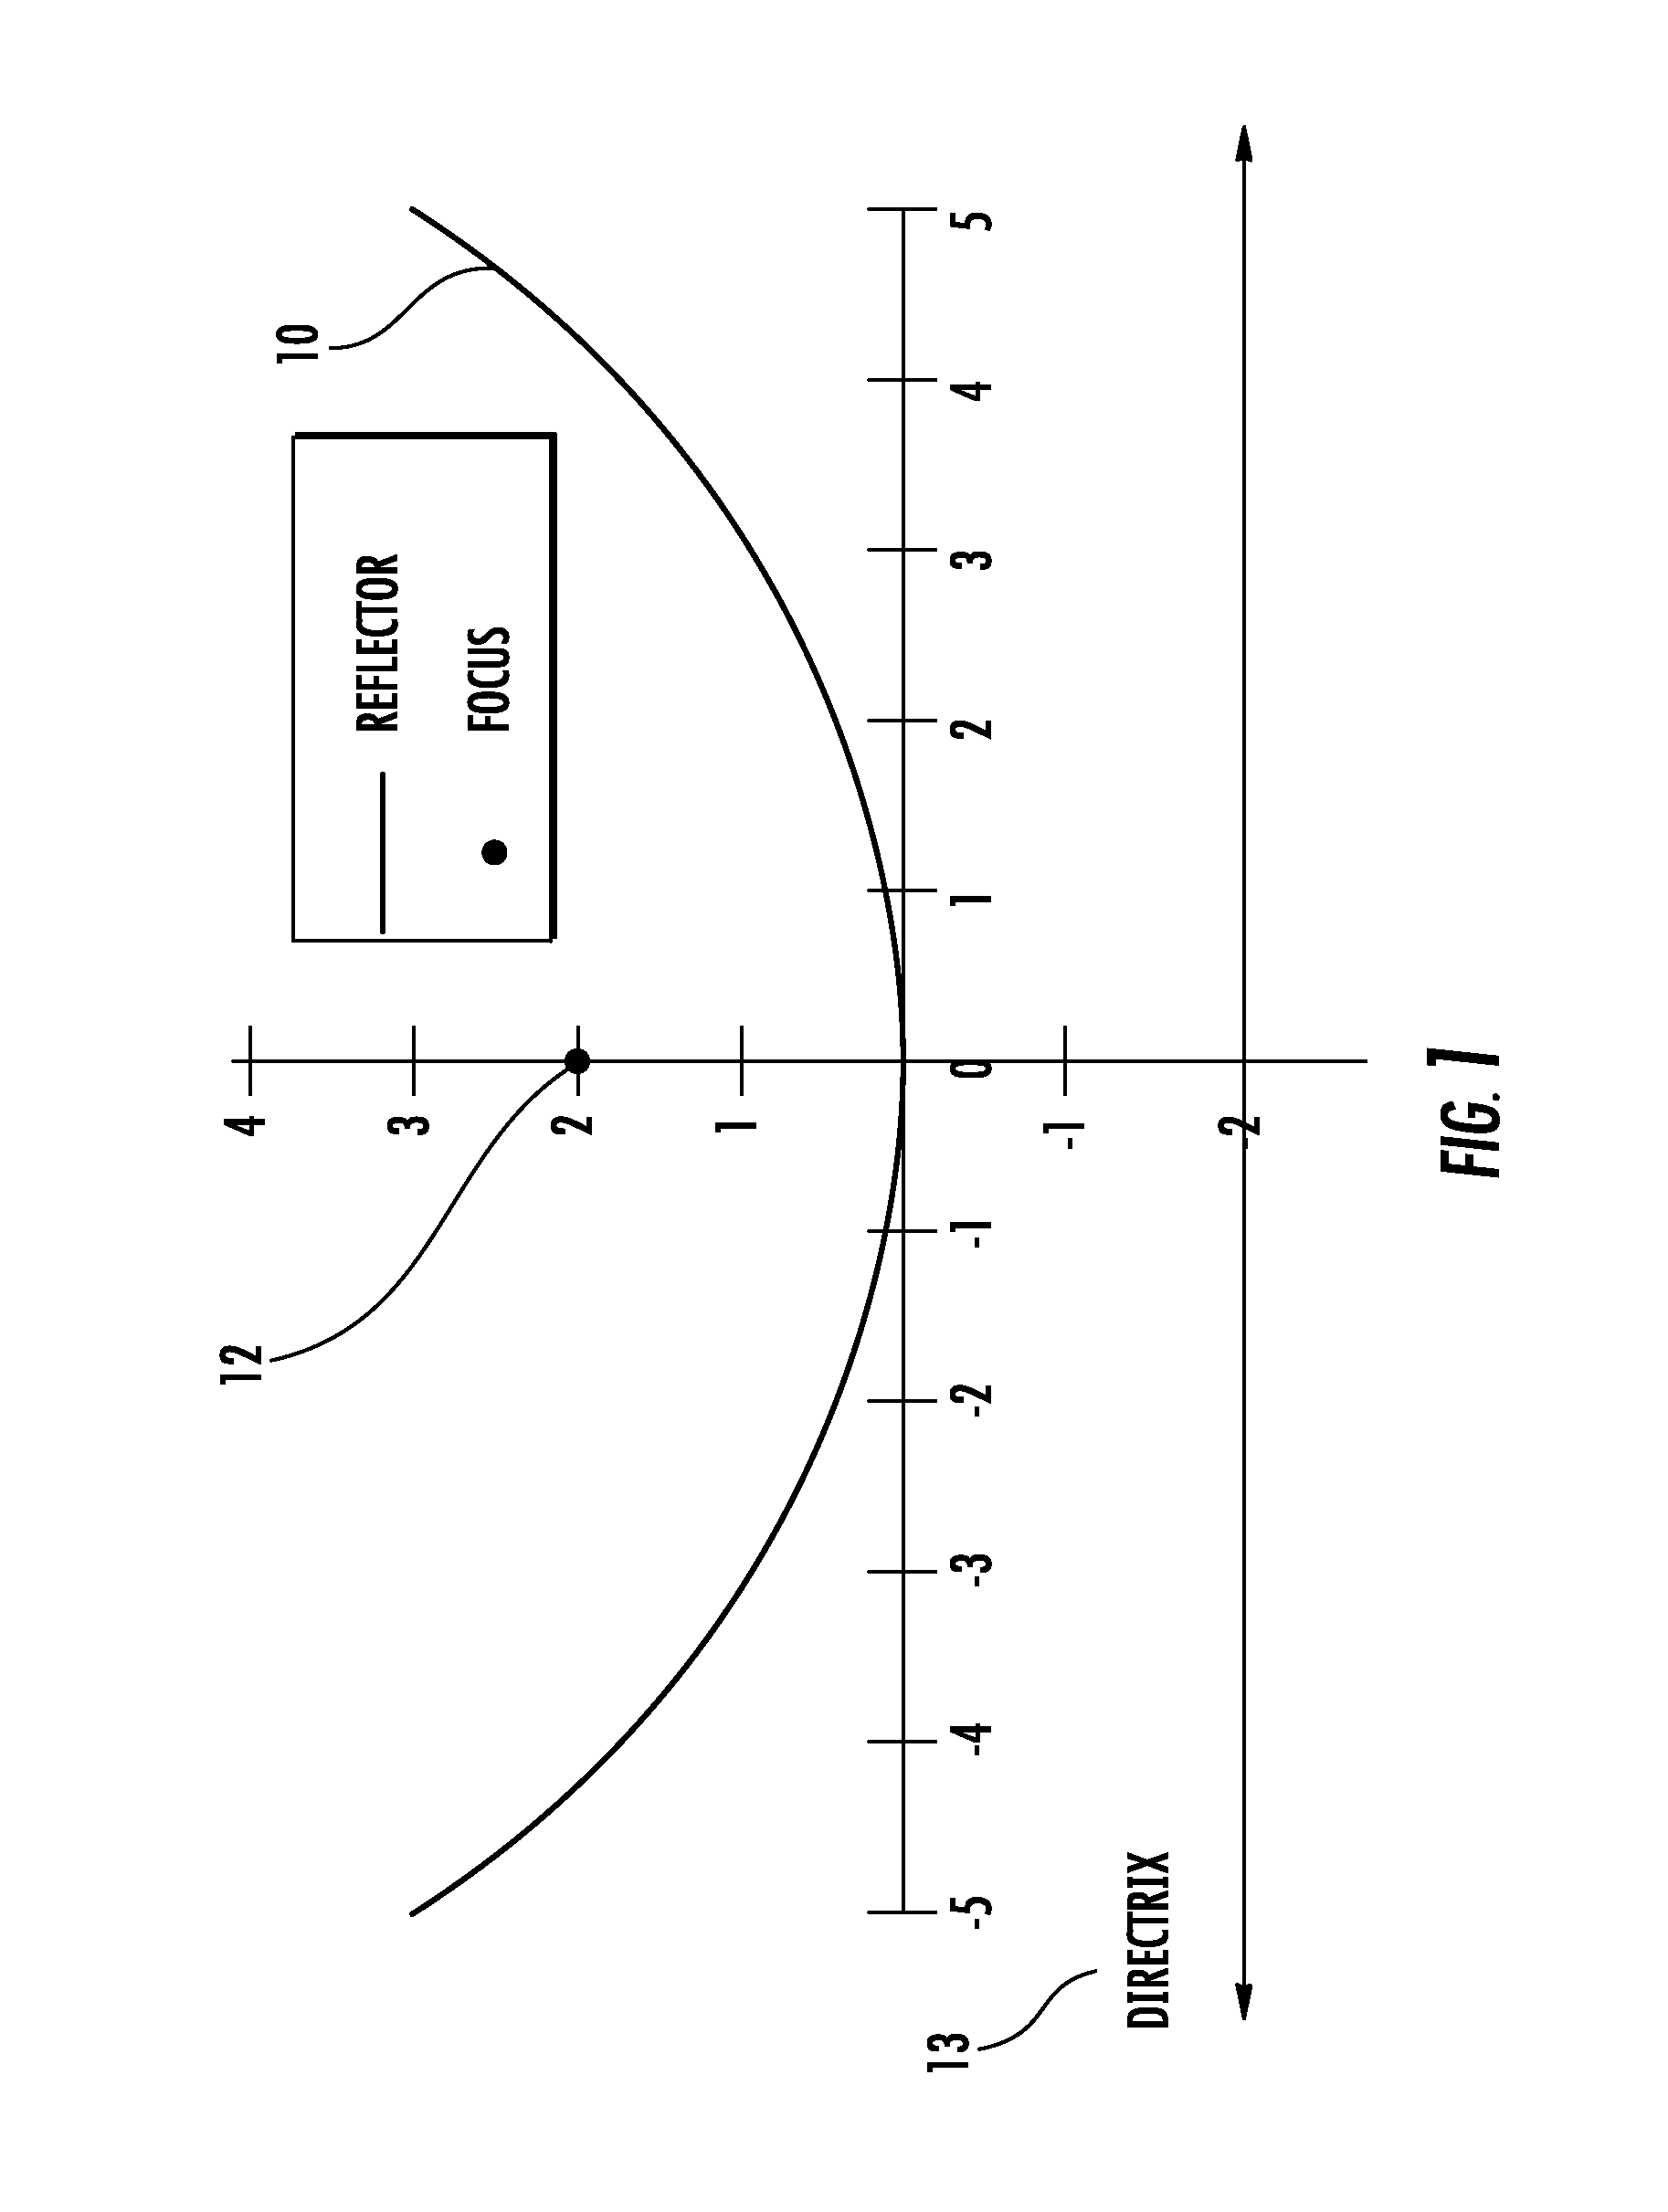 Apparatuses and methods for providing a secondary reflector on a solar collector system